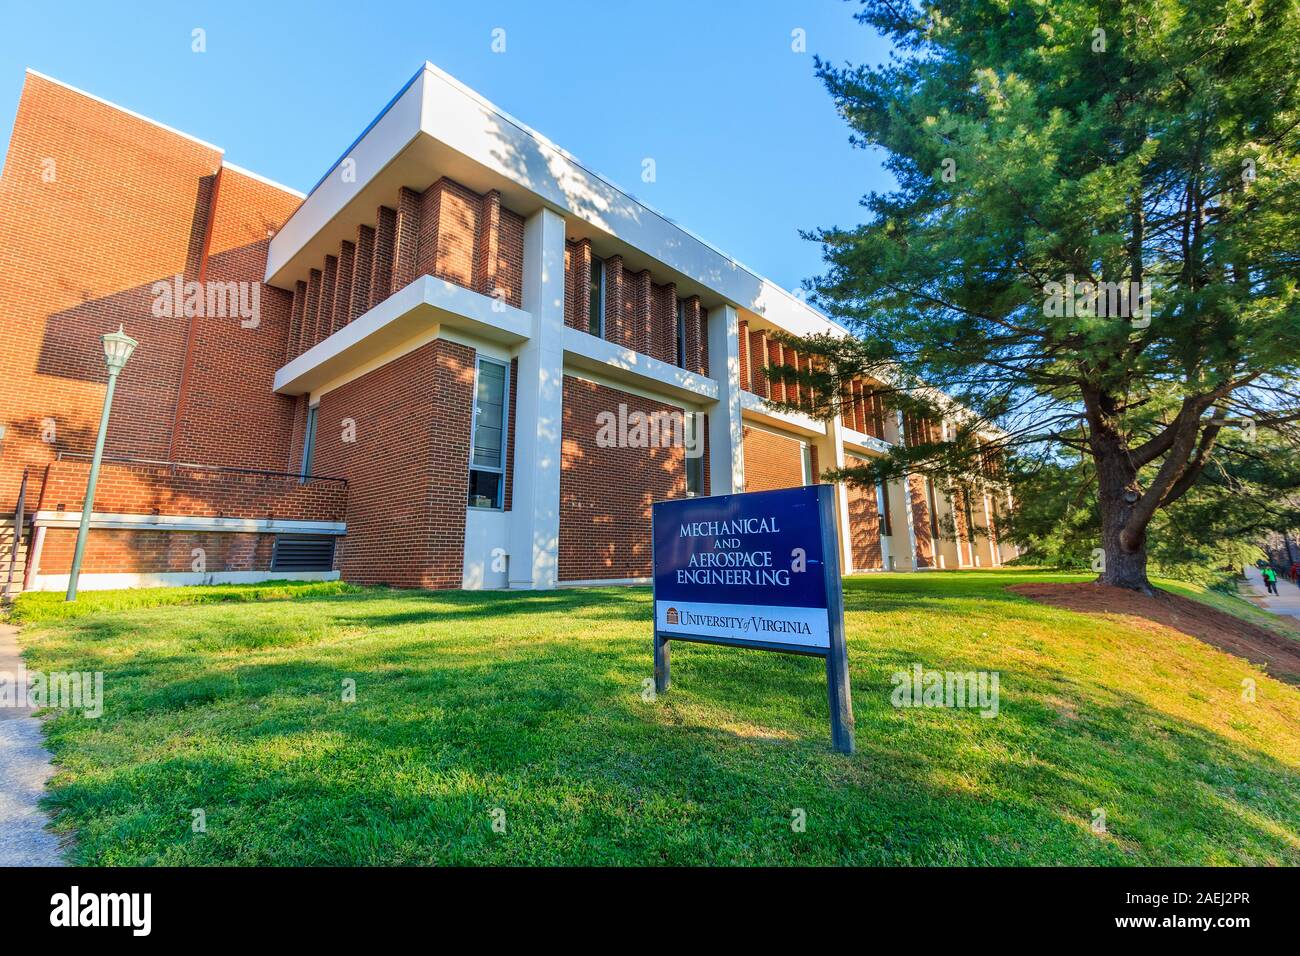 CHARLOTTESVILLE, VA, USA - APRIL 15: Mechanical and Aerospace Engineering Building on April 15, 2016 at the University of Virginia in Charlottesville, Stock Photo